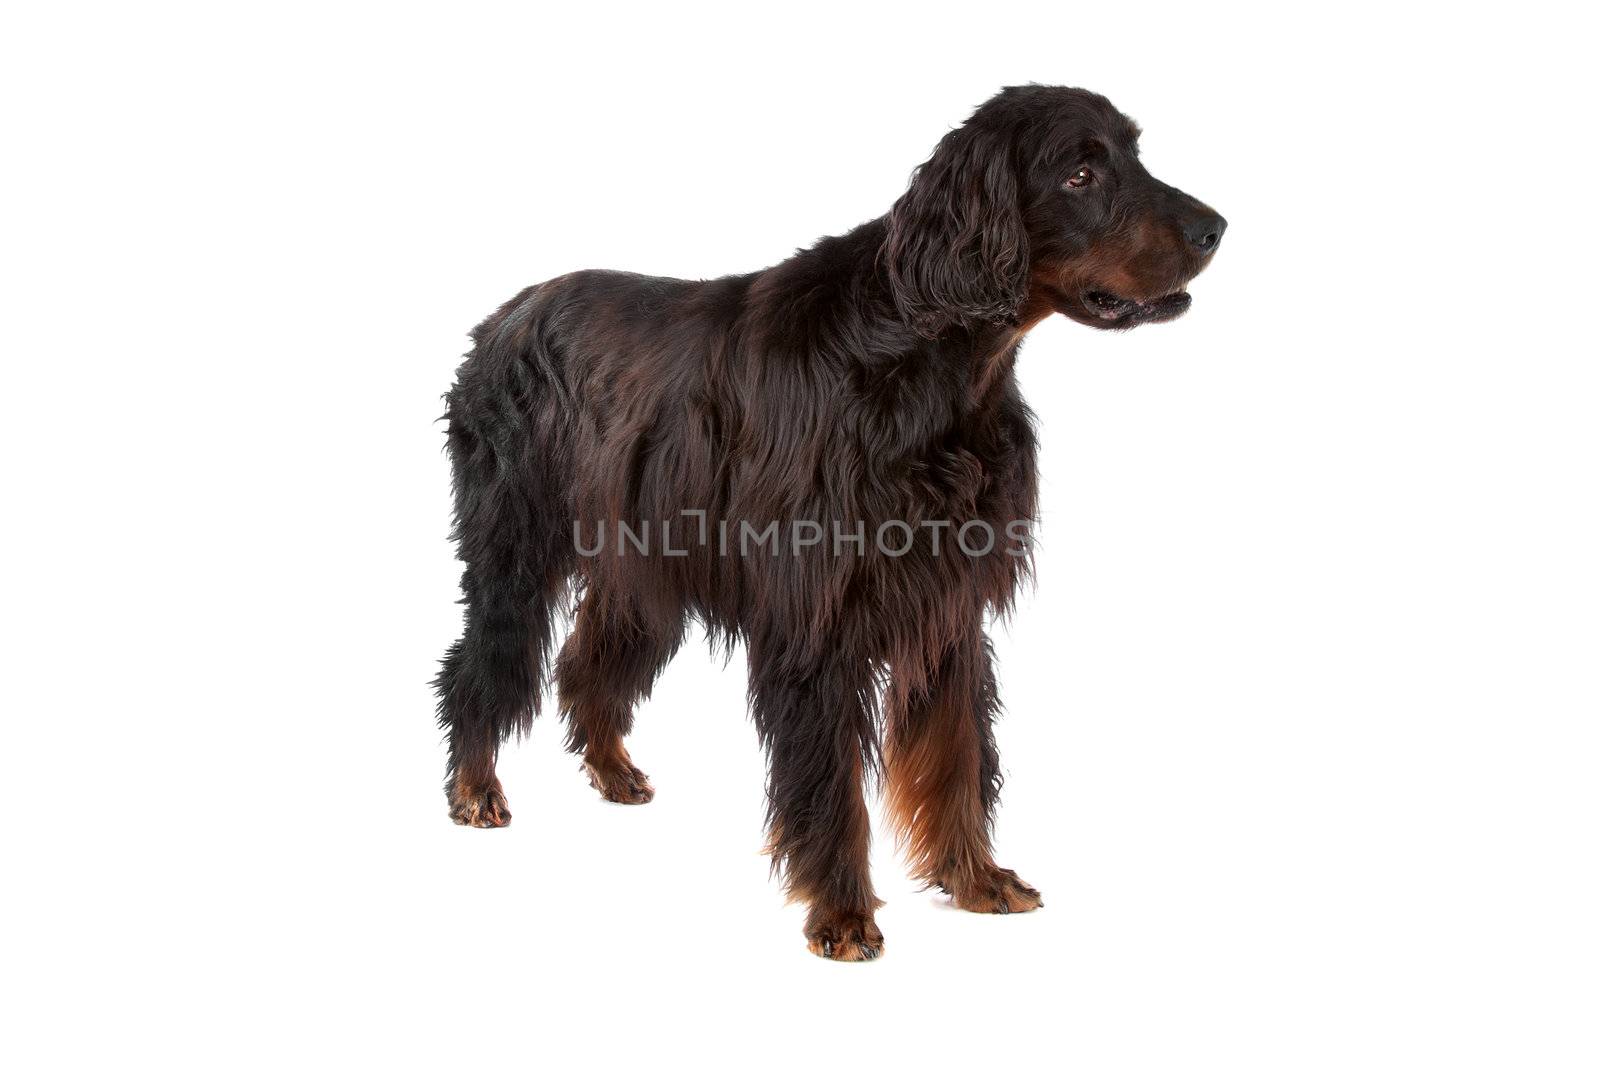 front view of Irish Setter dog on a white background